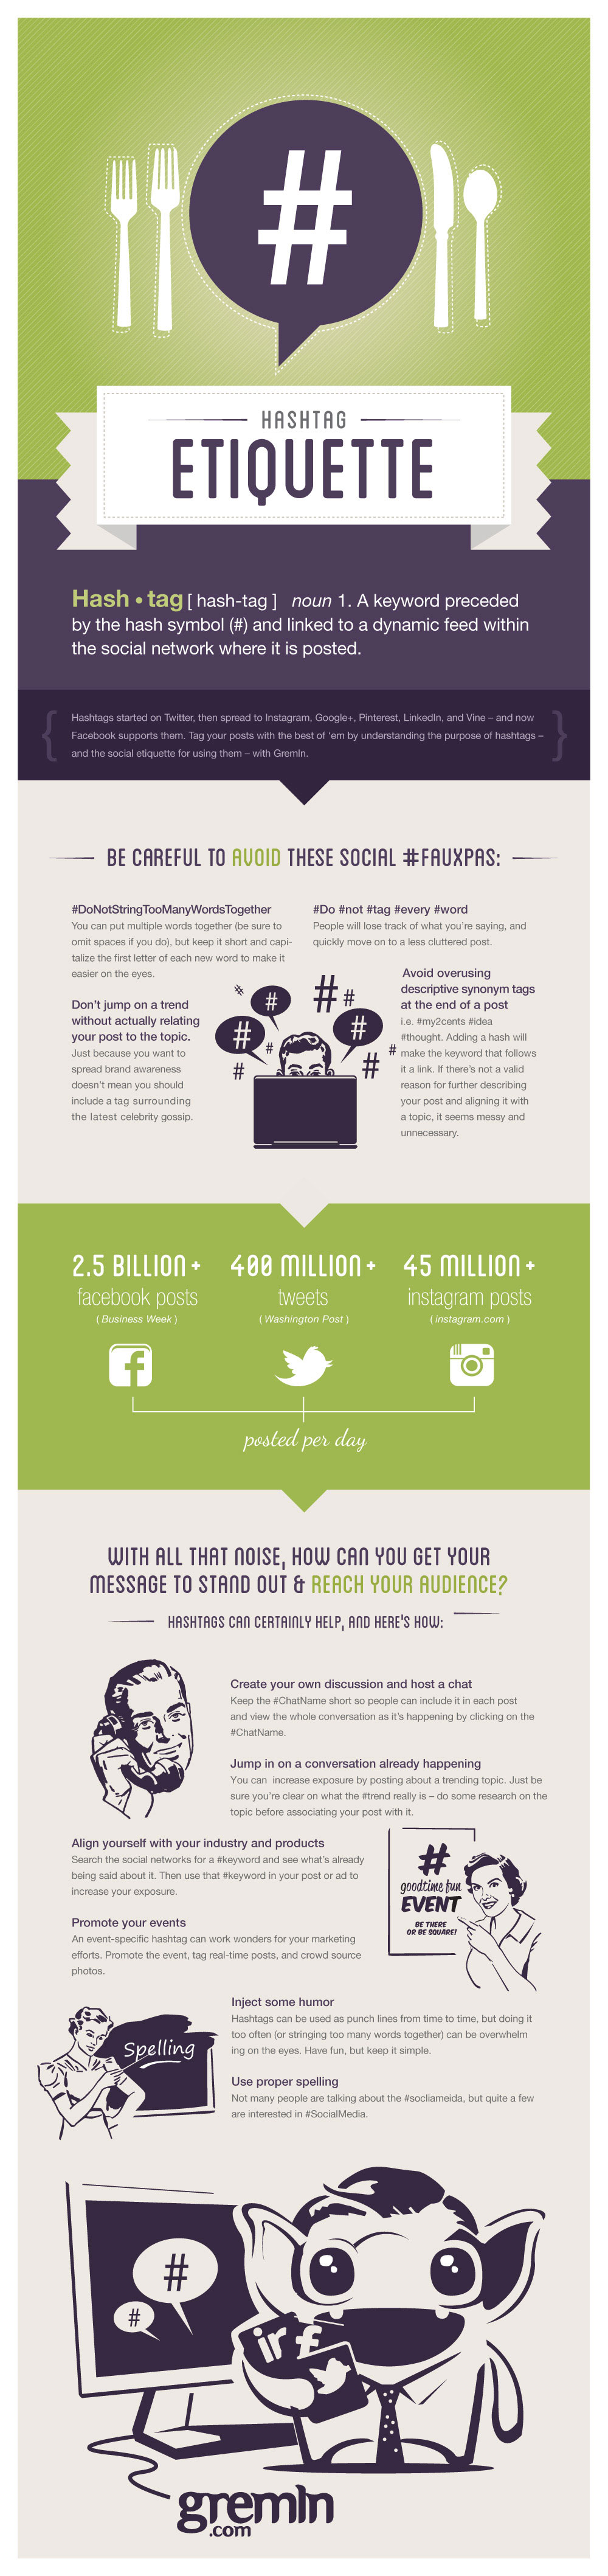 Mind Your Manners: Social Media Hashtag Etiquette [Infographic]